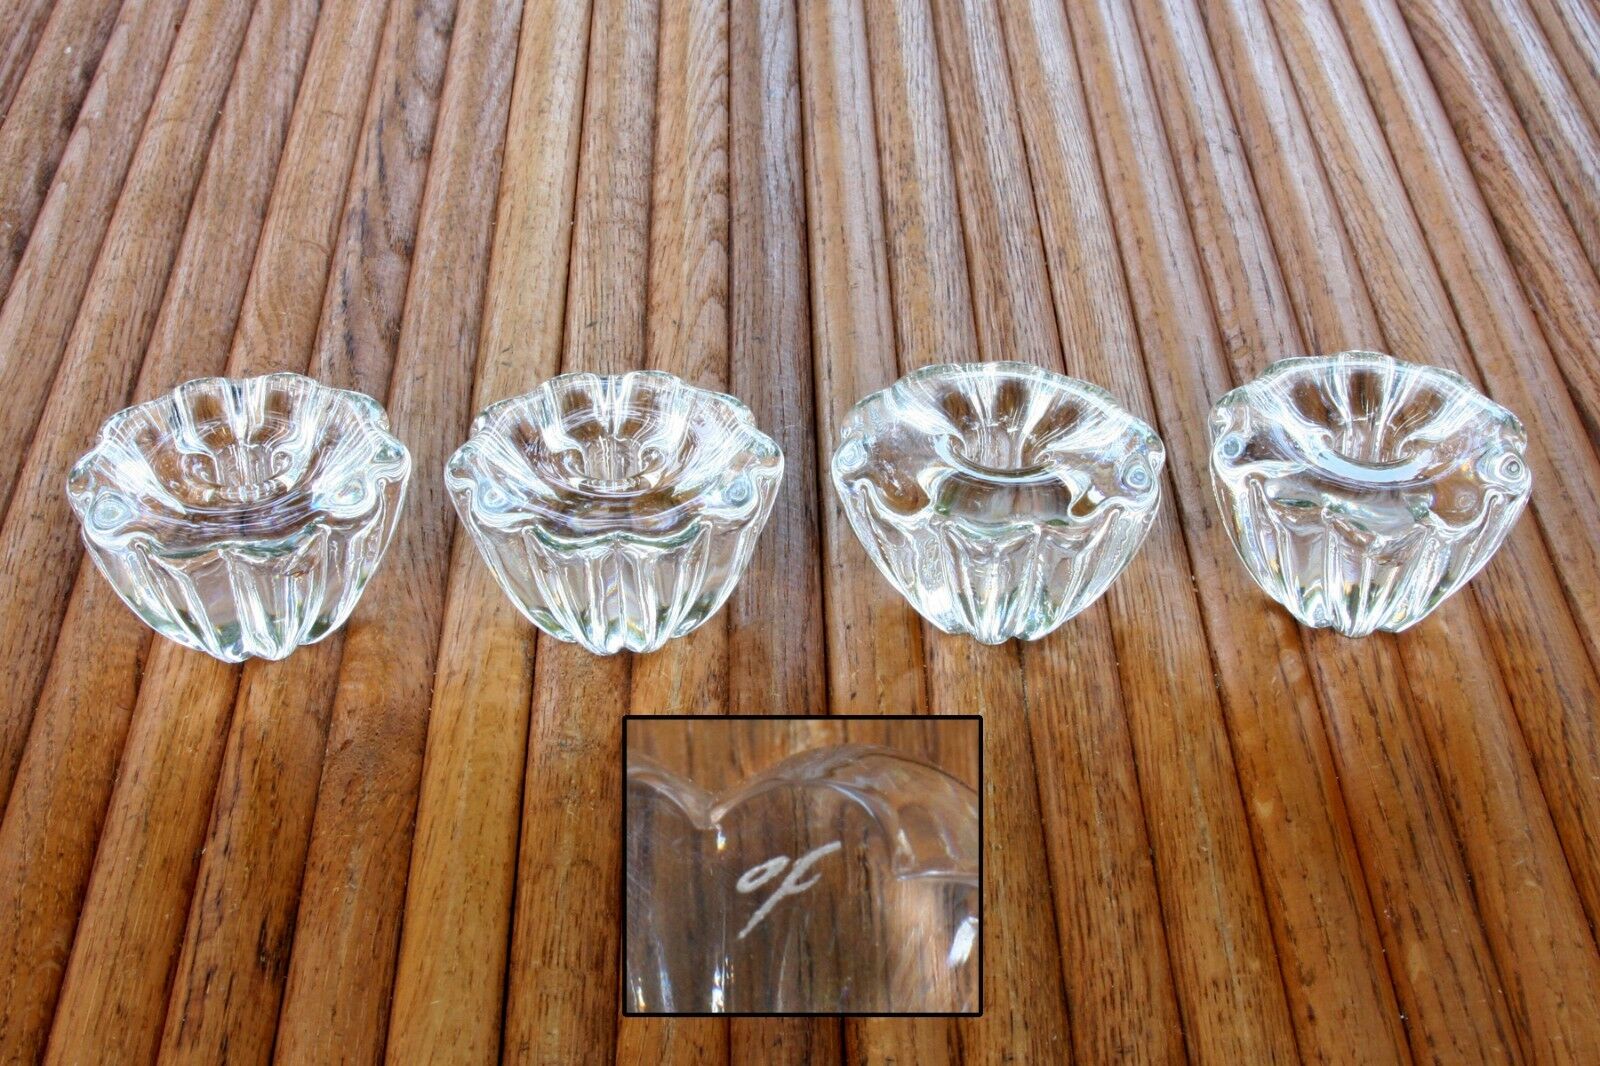 4 Vintage 24% Lead Crystal Miniature Candle Holder Votives By Of Lqqk!!!